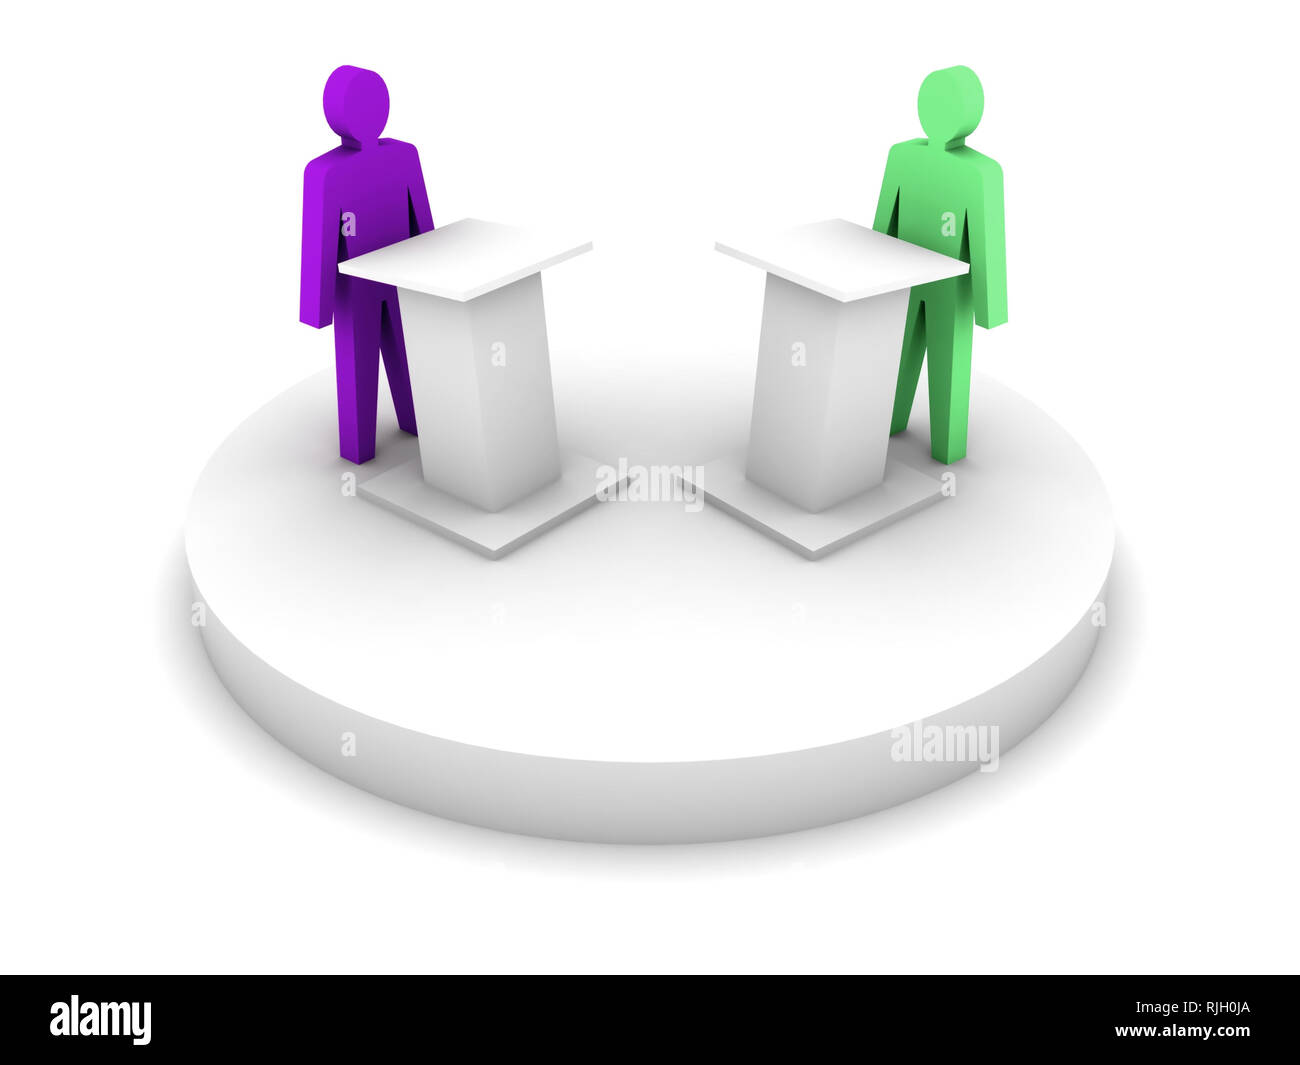 Debate. Speaking from a tribune, confrontation. Concept 3D illustration. Stock Photo